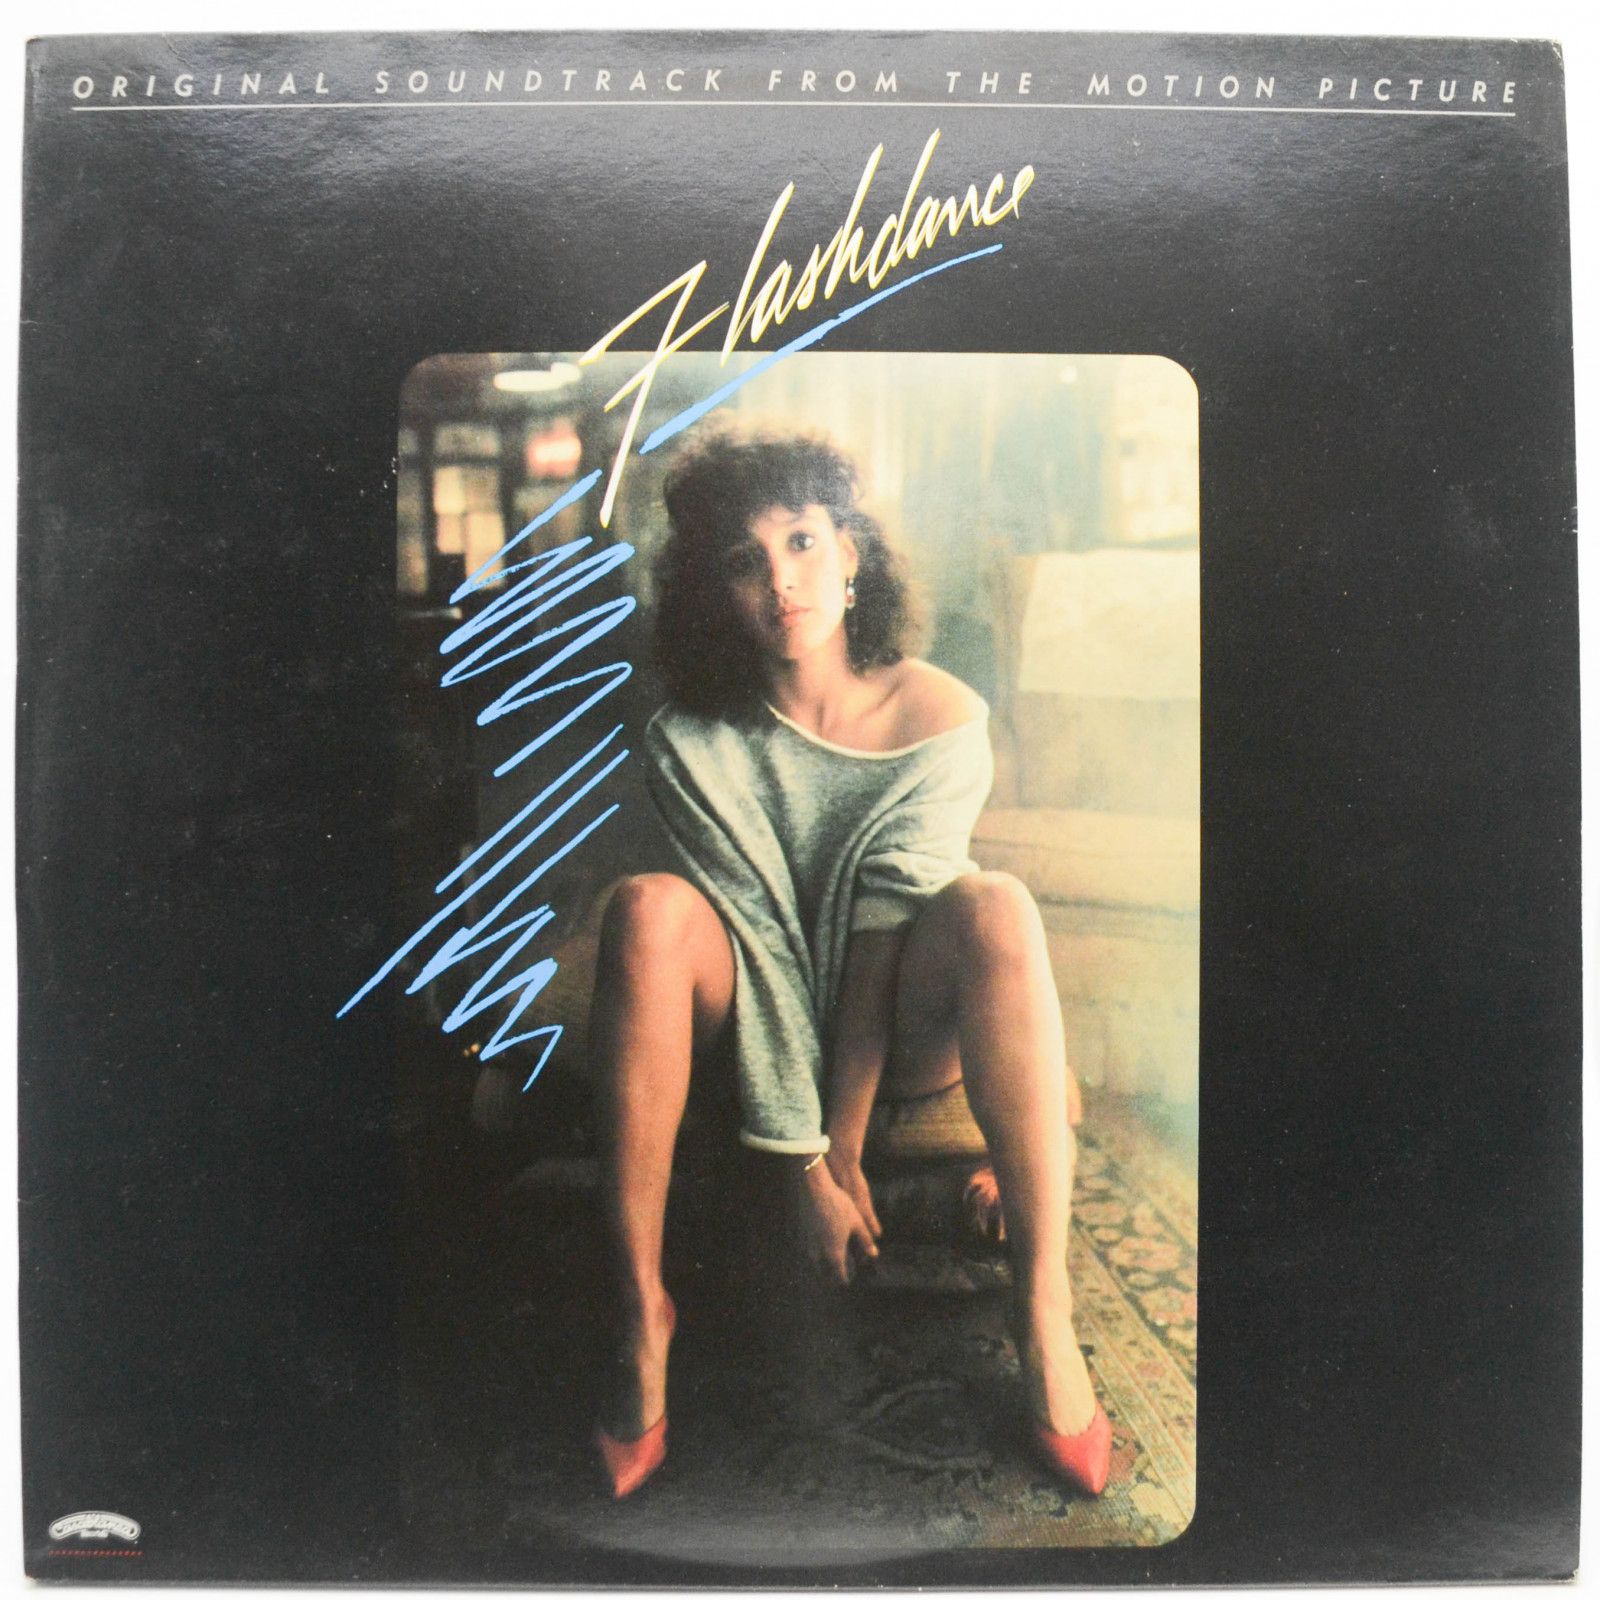 Various — Flashdance (Original Soundtrack From The Motion Picture) (Italy), 1983